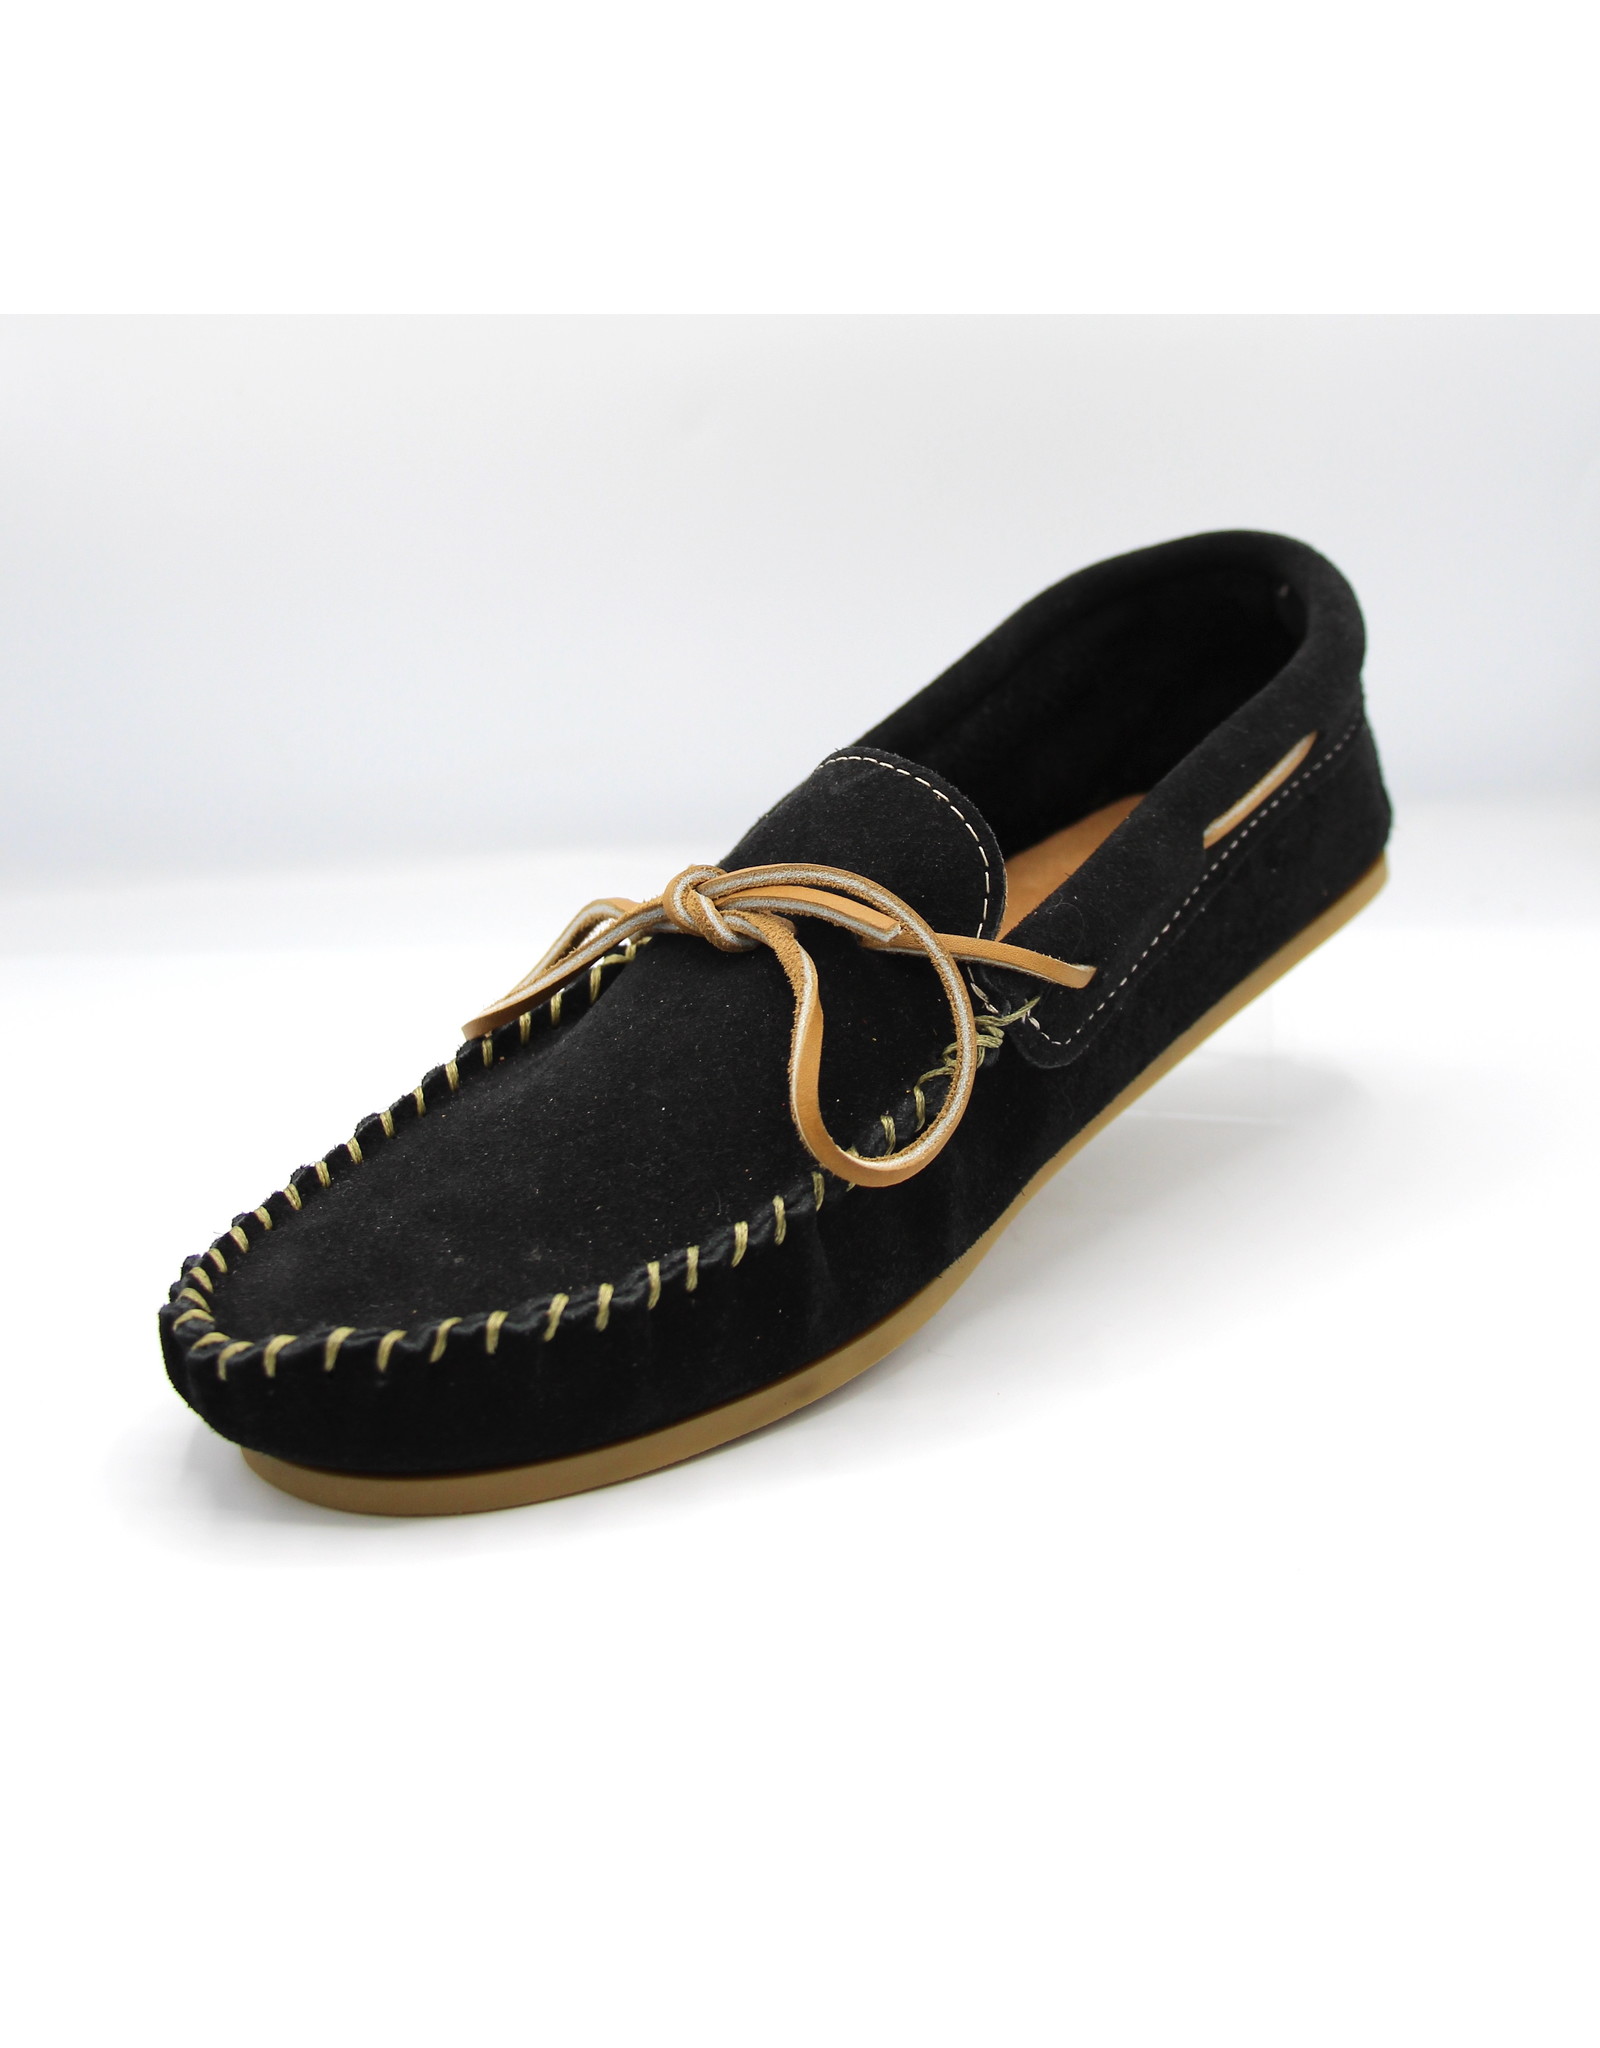 Navy Suede Moccasin with Sole Men - 13108BLM